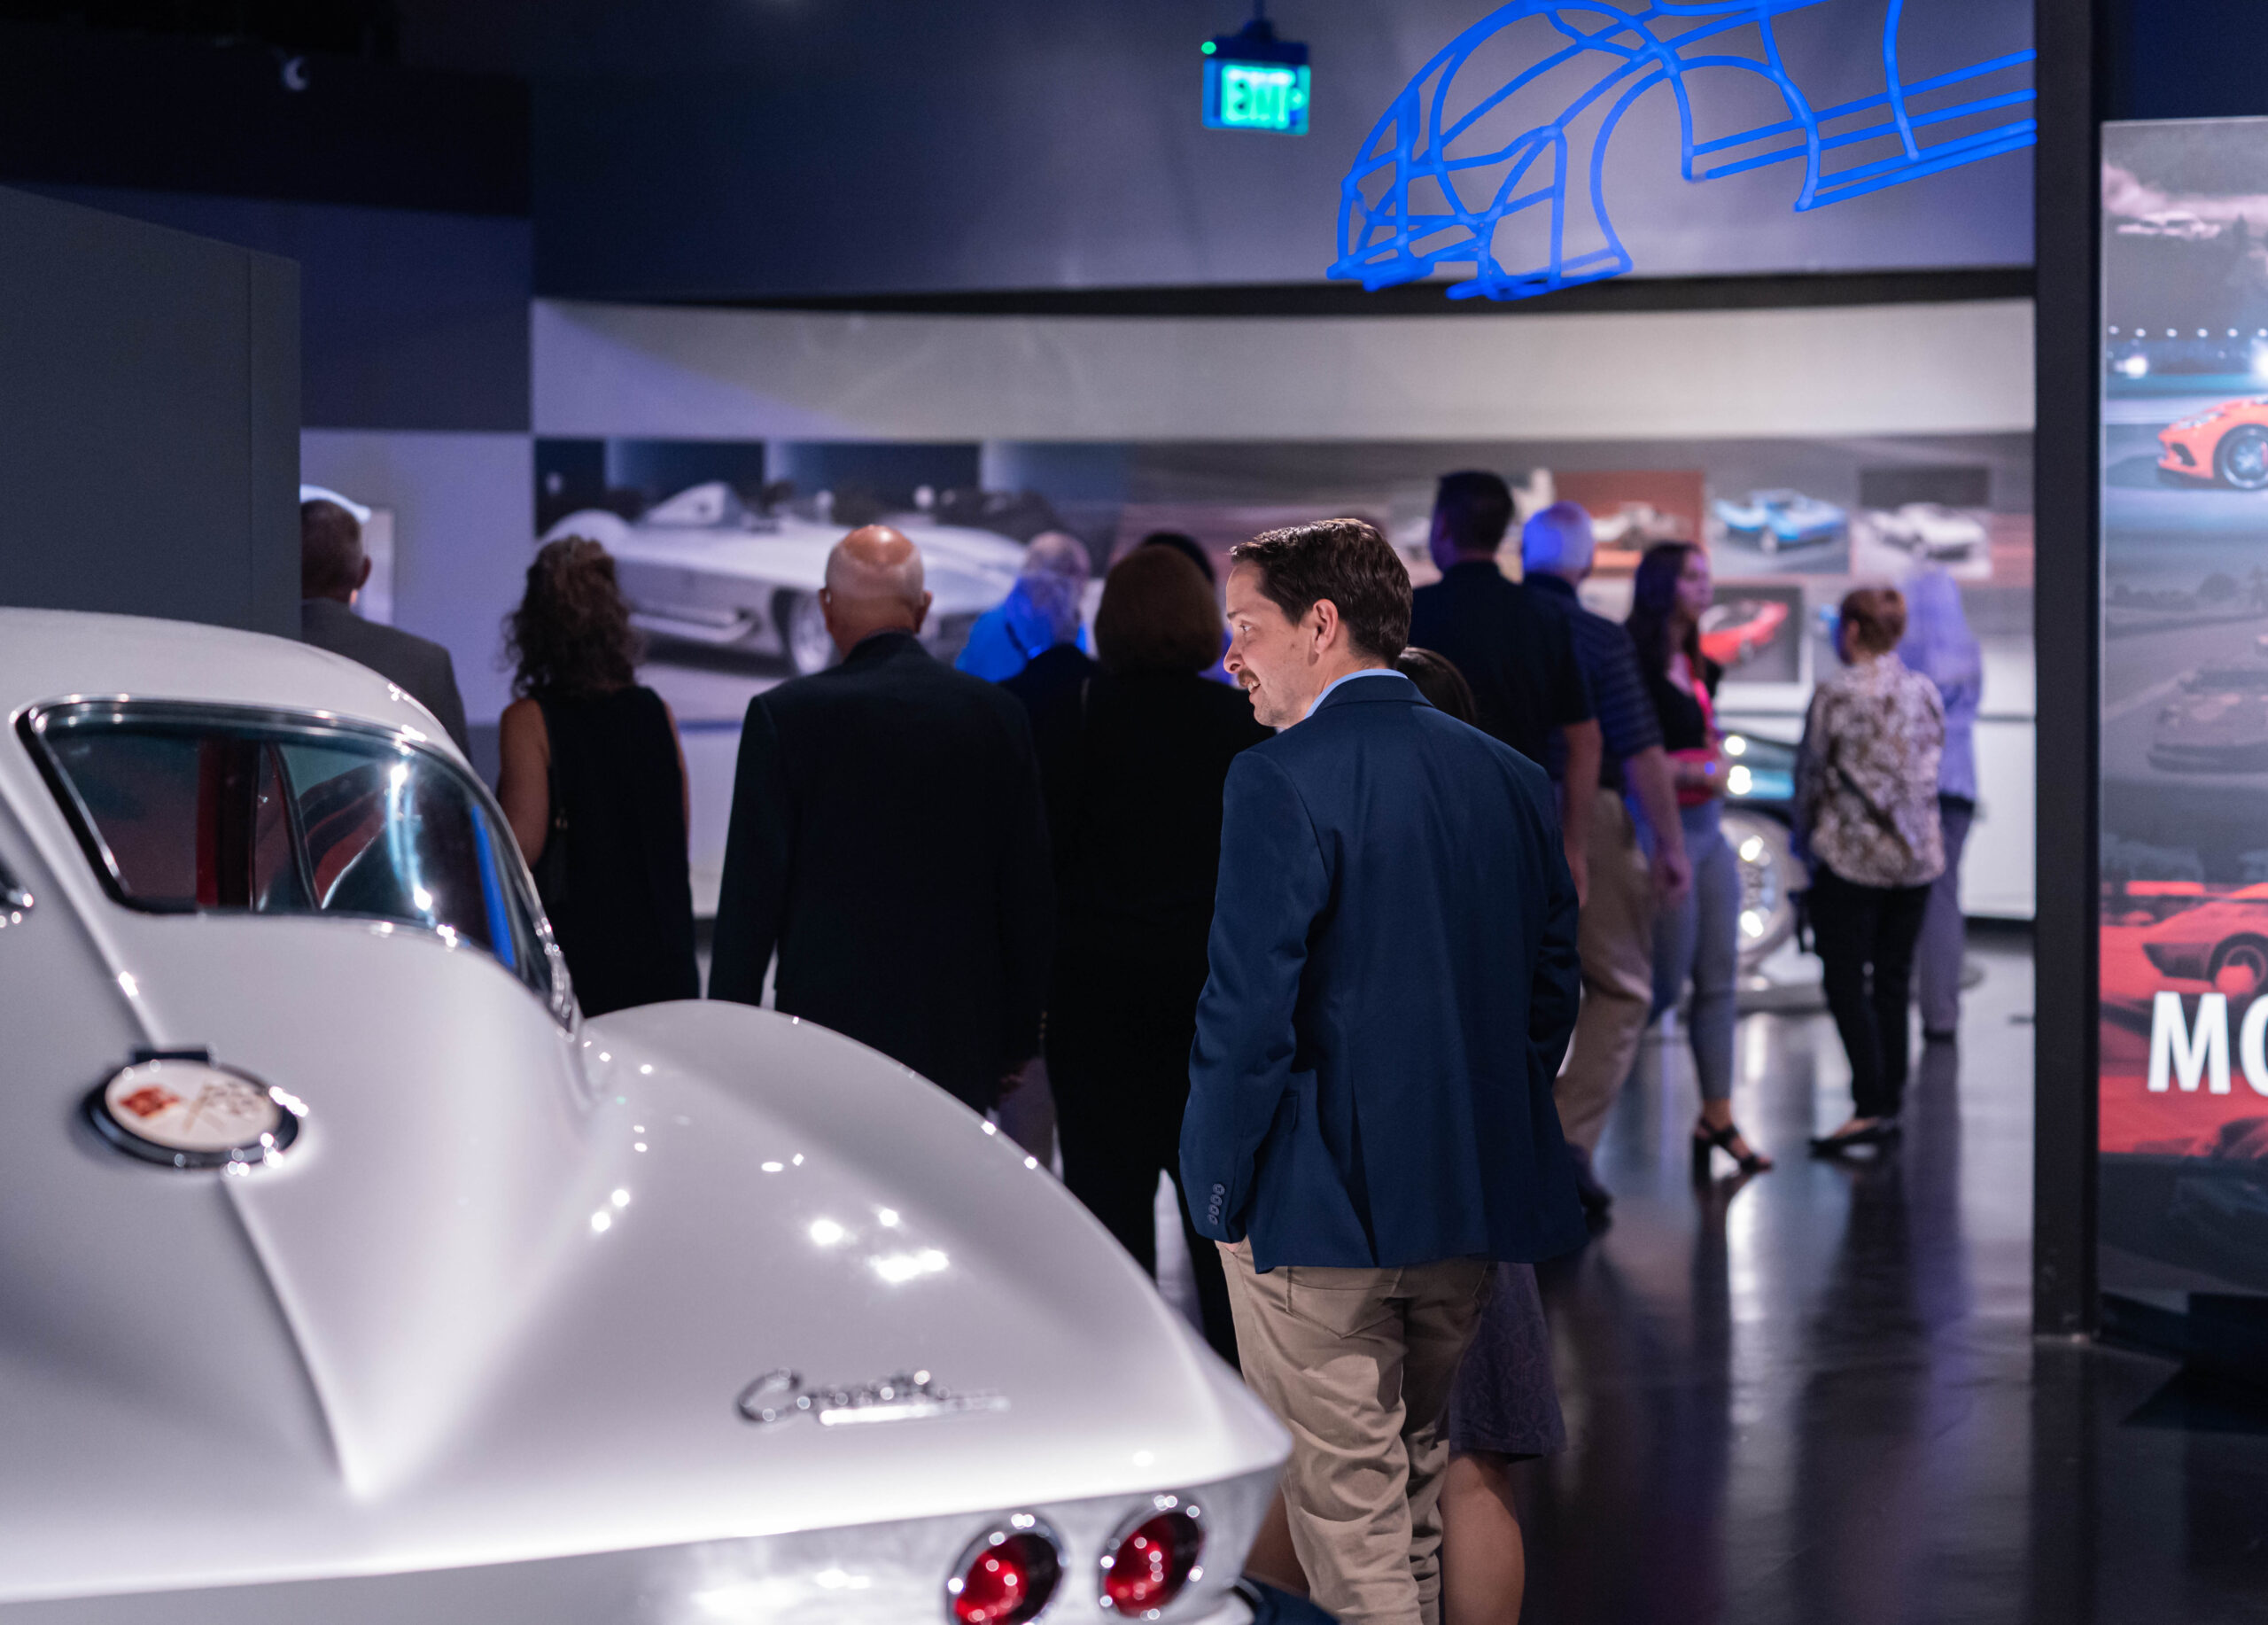 Driven By Design Exhibit Now Open at the National Corvette Museum